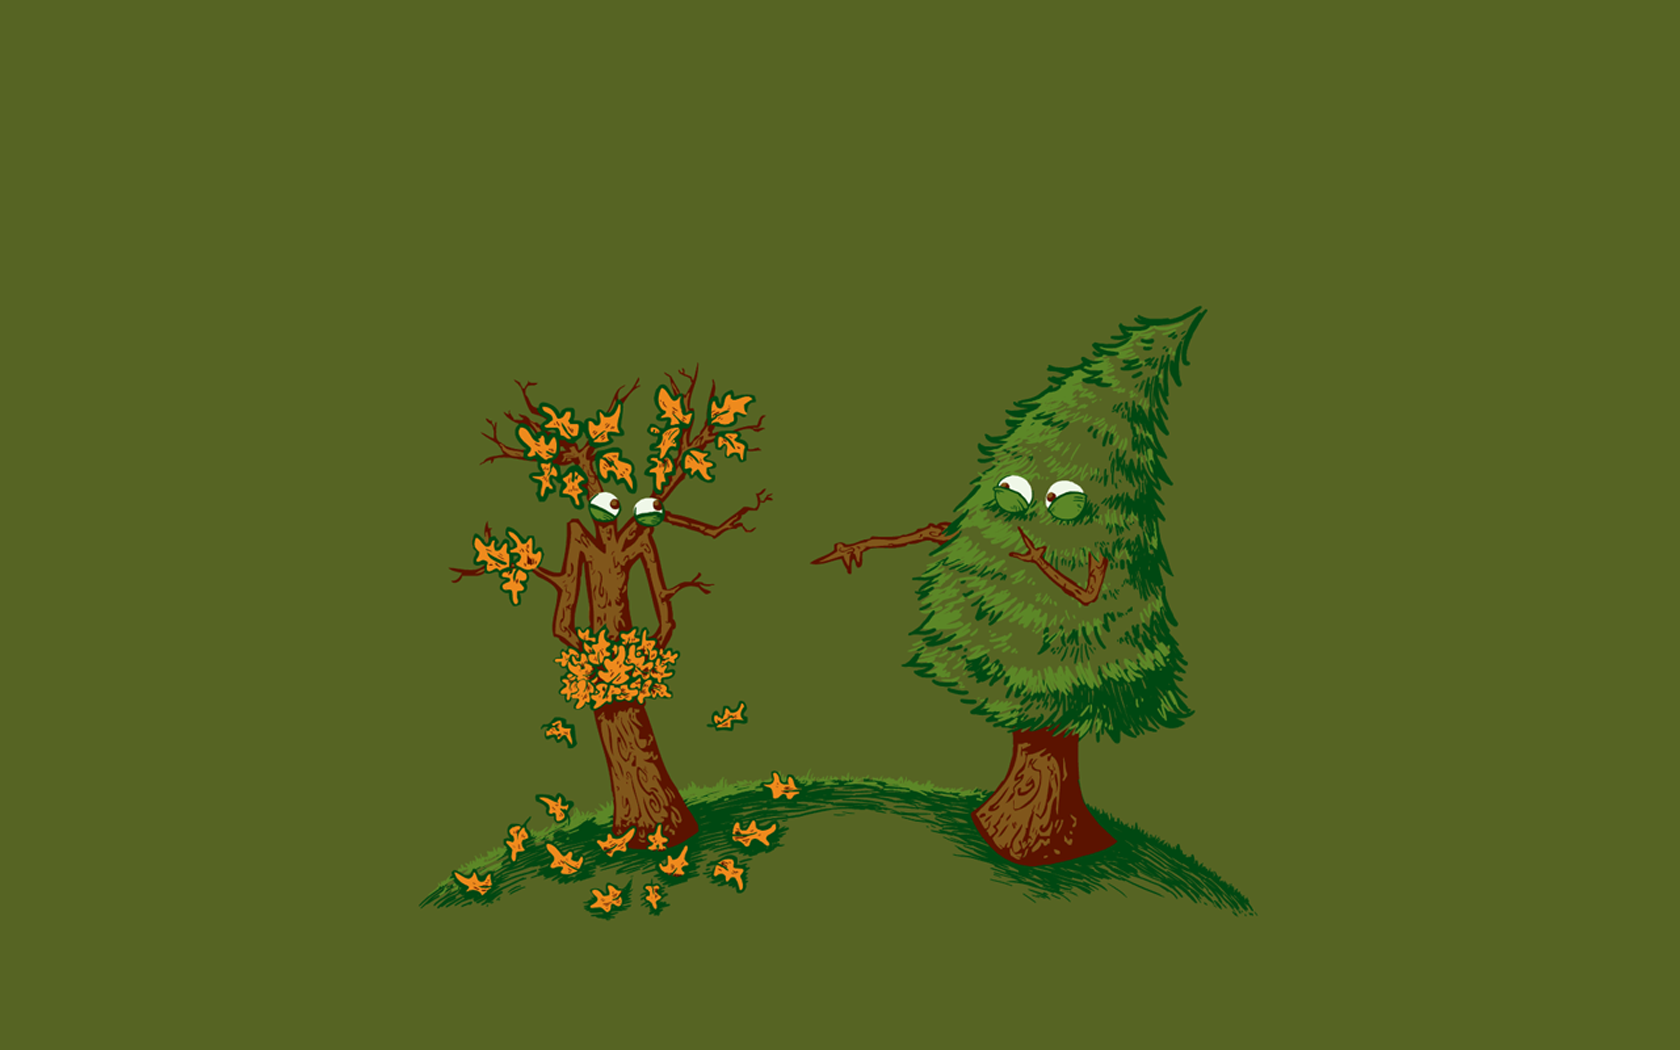 Comedy trees wallpaper - High Quality and Resolution